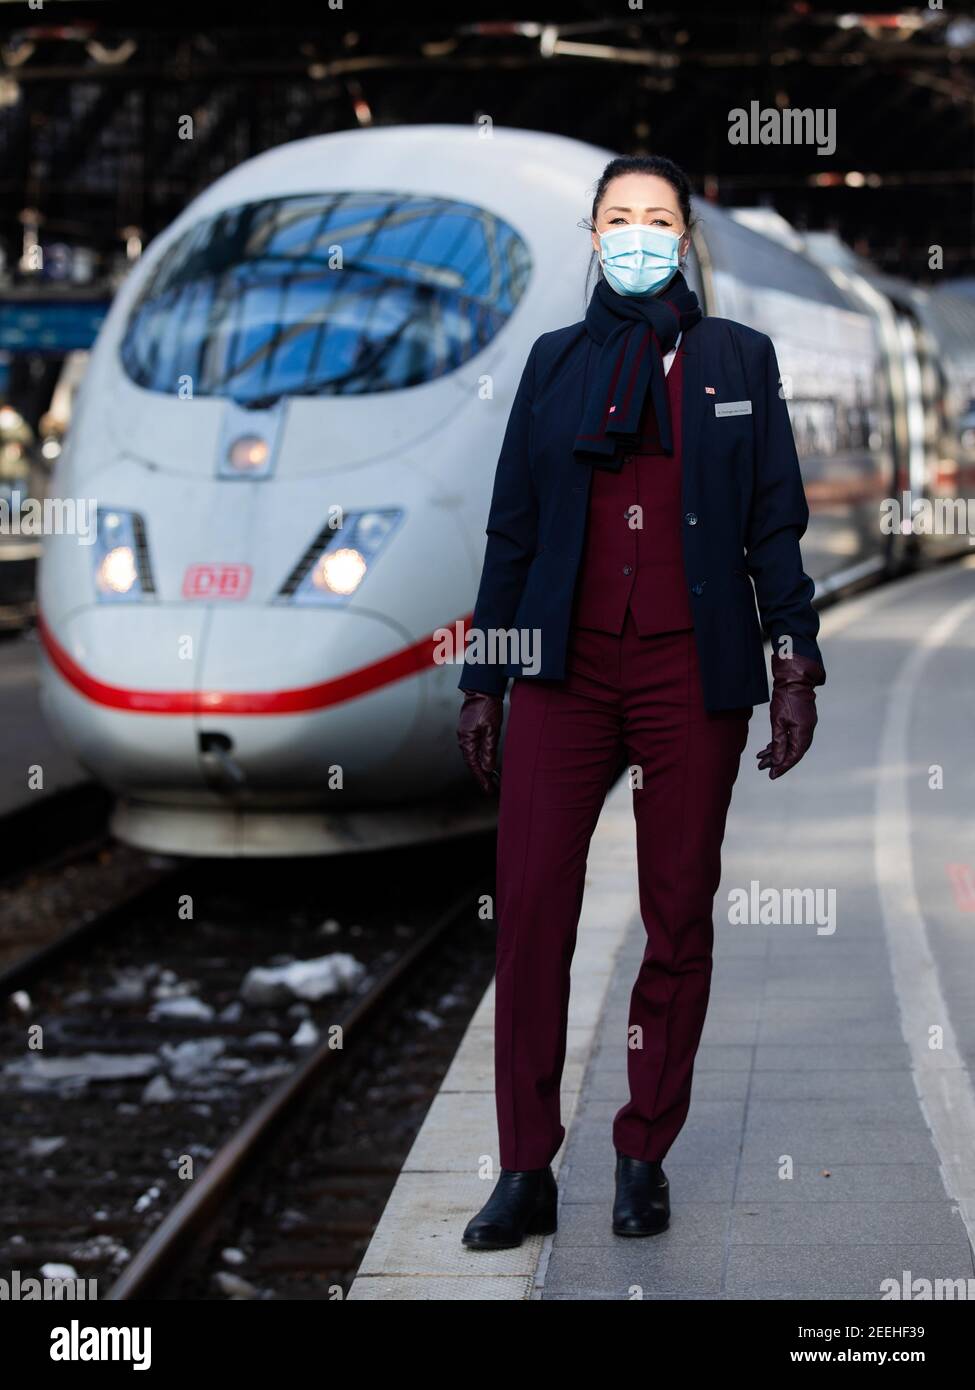 Cologne, Germany. 11th Feb, 2021. Nadine Perlinger dos Santos, former stewardess at Lufthansa subsidiary Germanwings and now a Deutsche Bahn train attendant, stands in front of an ICE train. Job prospects for pilots, flight attendants and aircraft technicians have deteriorated massively in the Corona crisis. In the reorientation, a state-owned company apparently offers advantages. (to dpa "From the jet to the ICE - Flying personnel highly welcome at Bahn") Credit: Rolf Vennenbernd/dpa/Alamy Live News Stock Photo